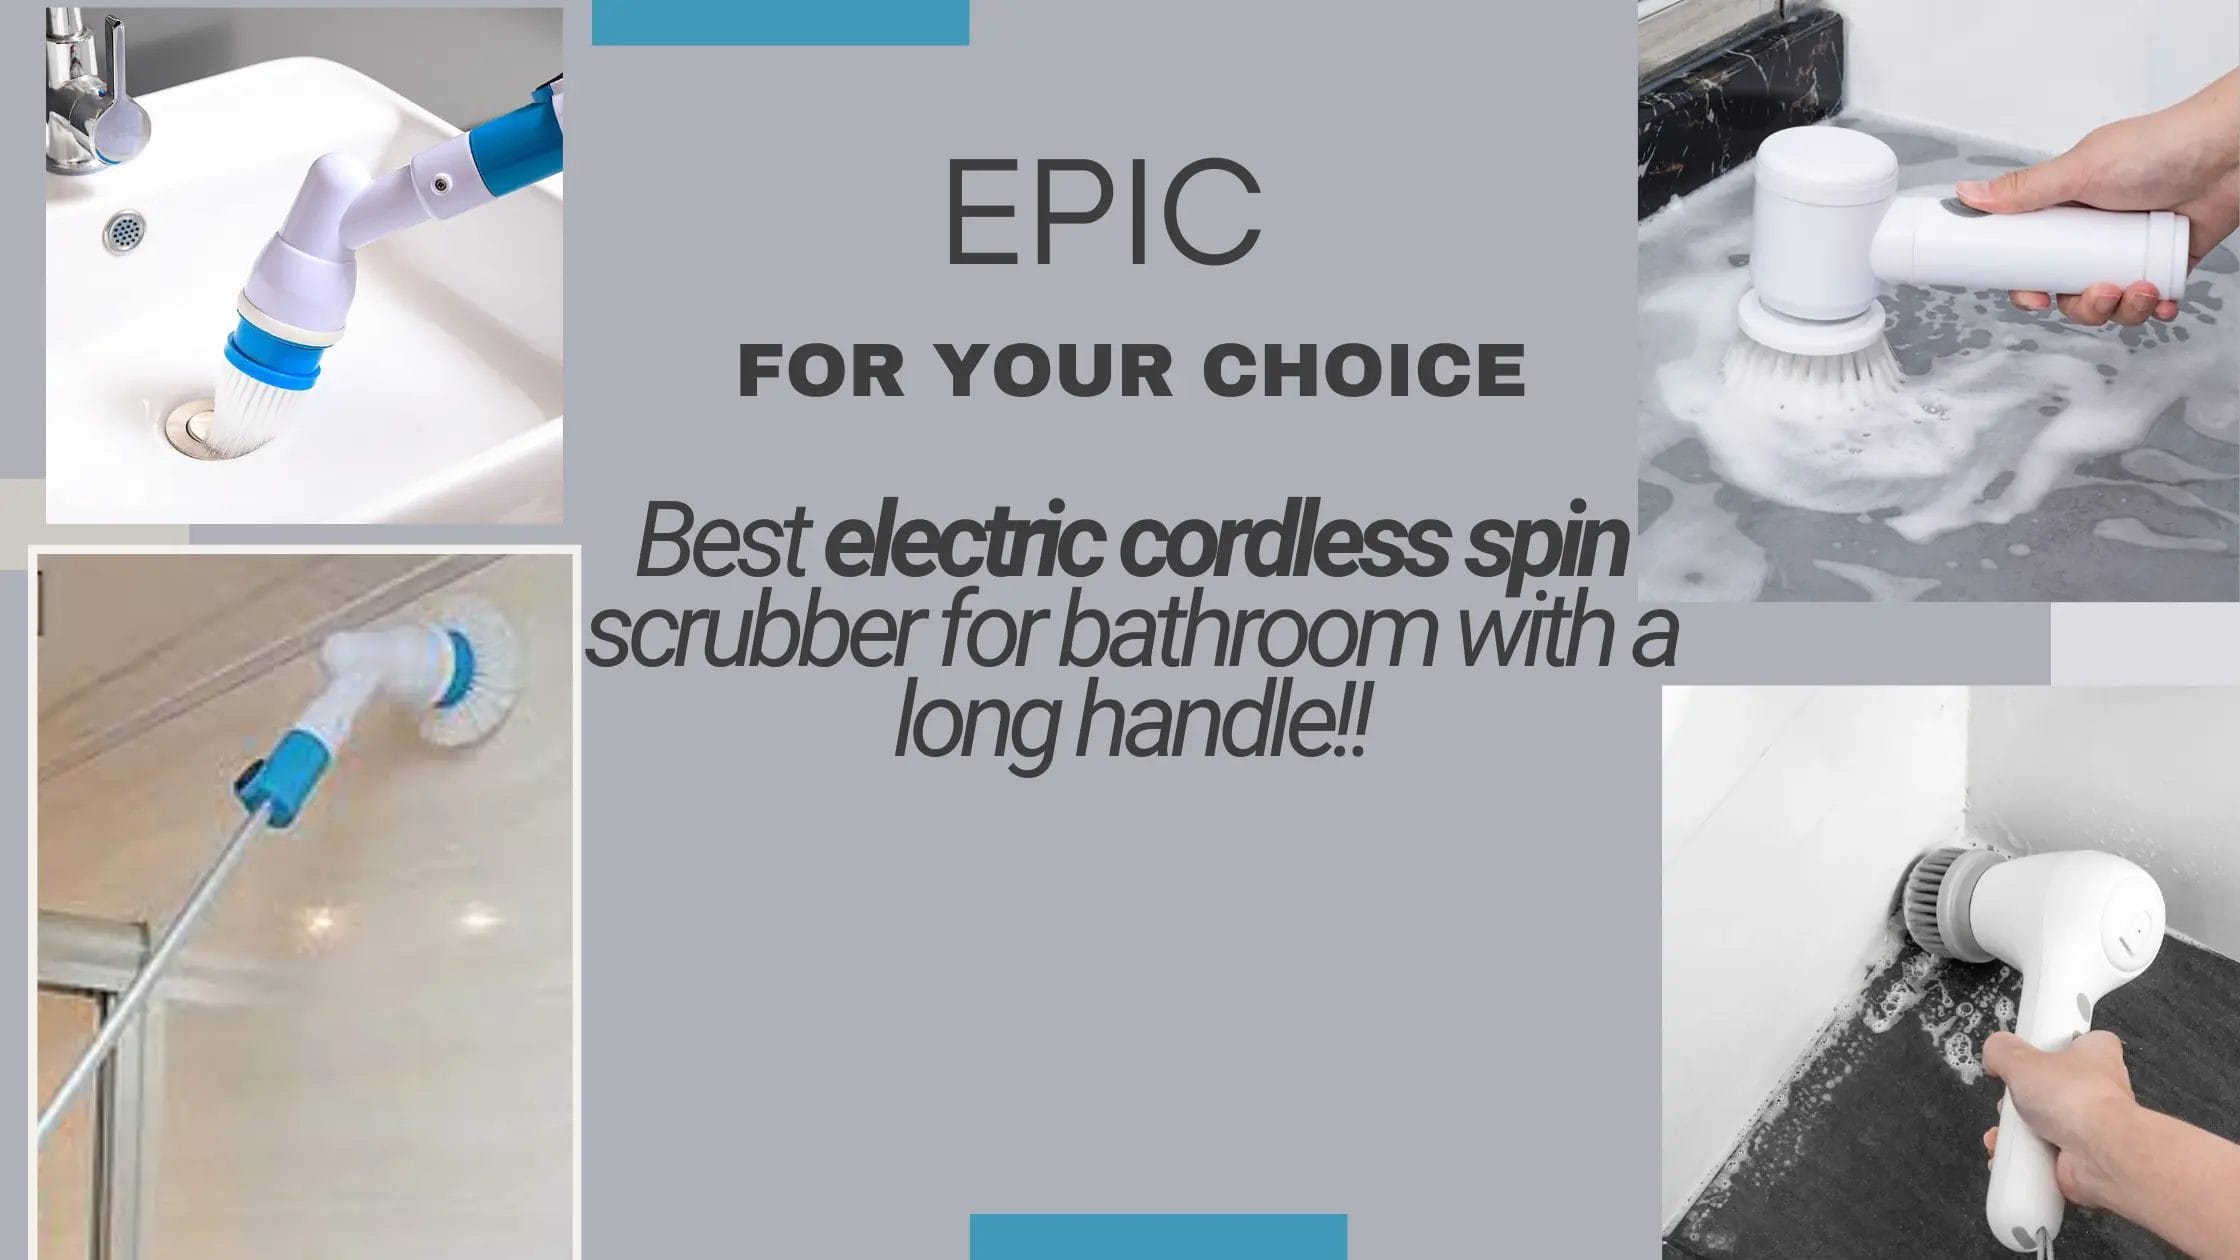 Best electric cordless spin scrubber for bathroom with a long handle